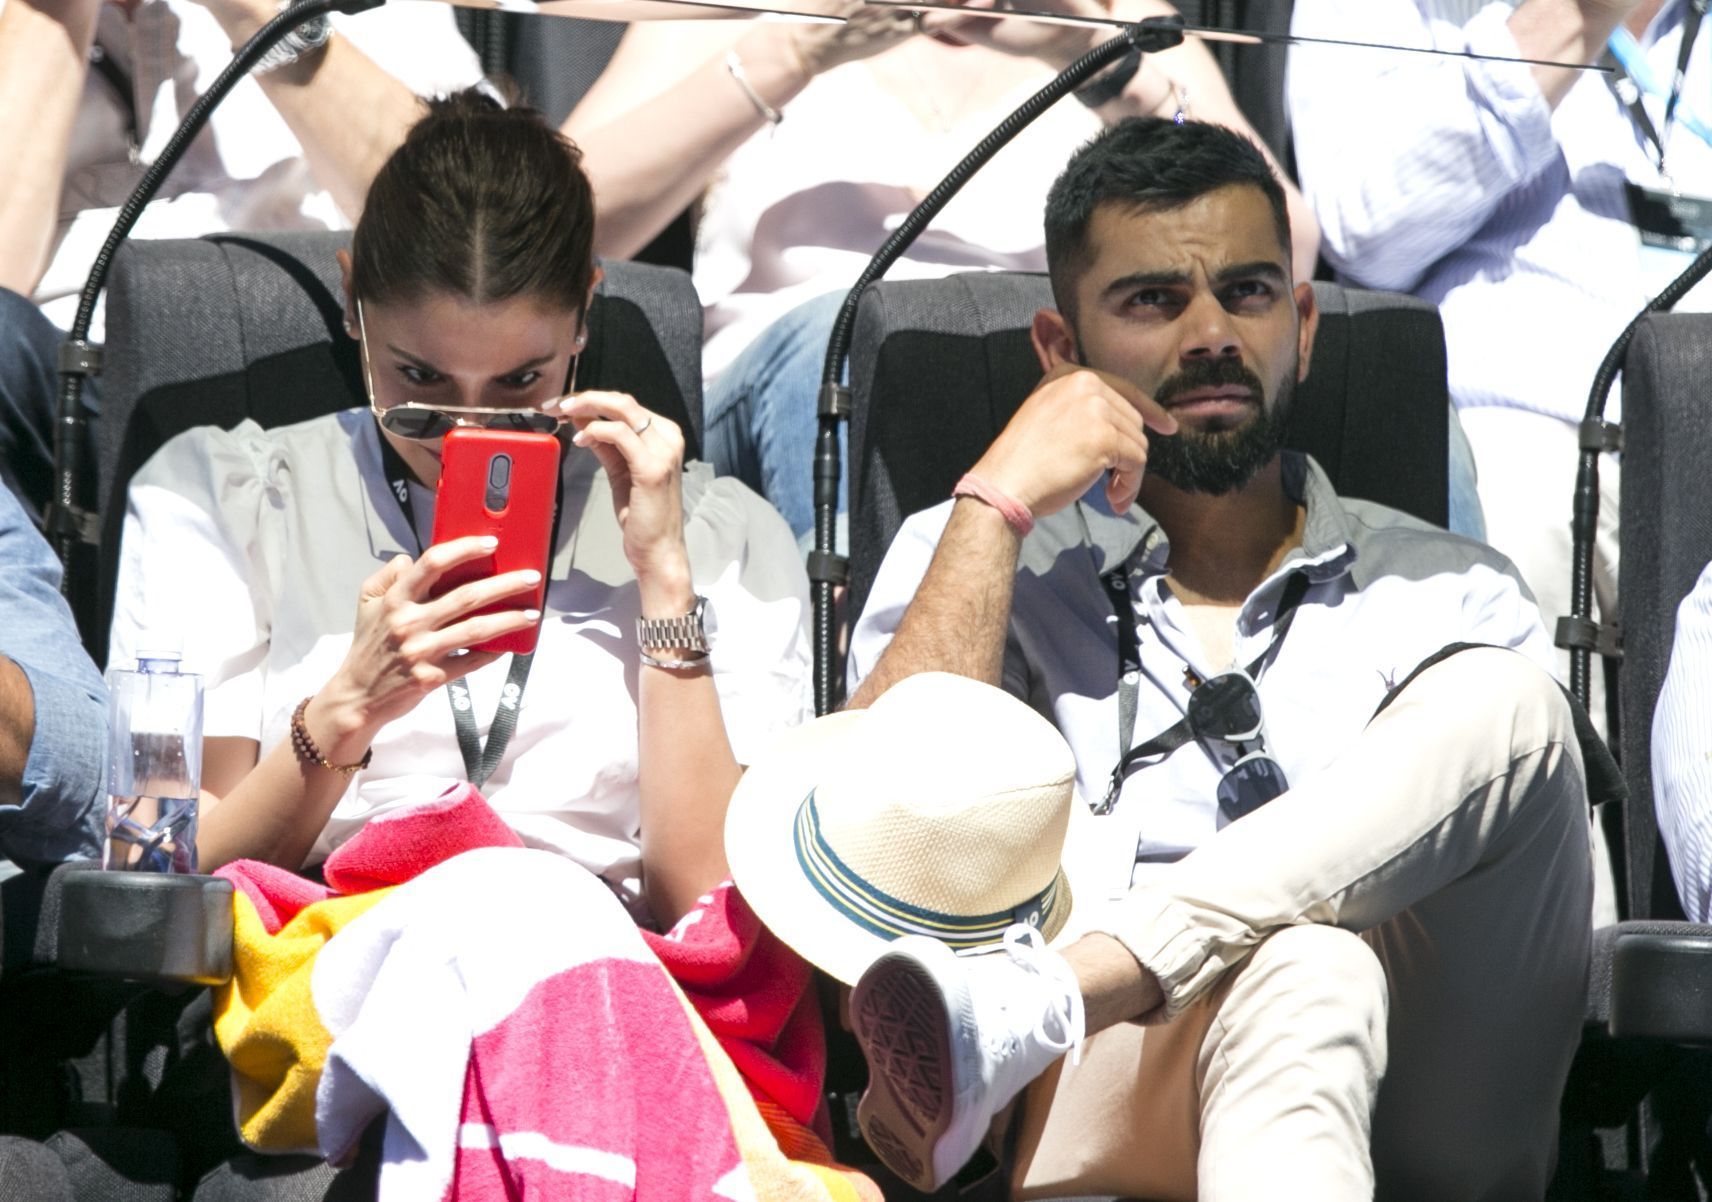 Off Court At The 2019 Australian Open